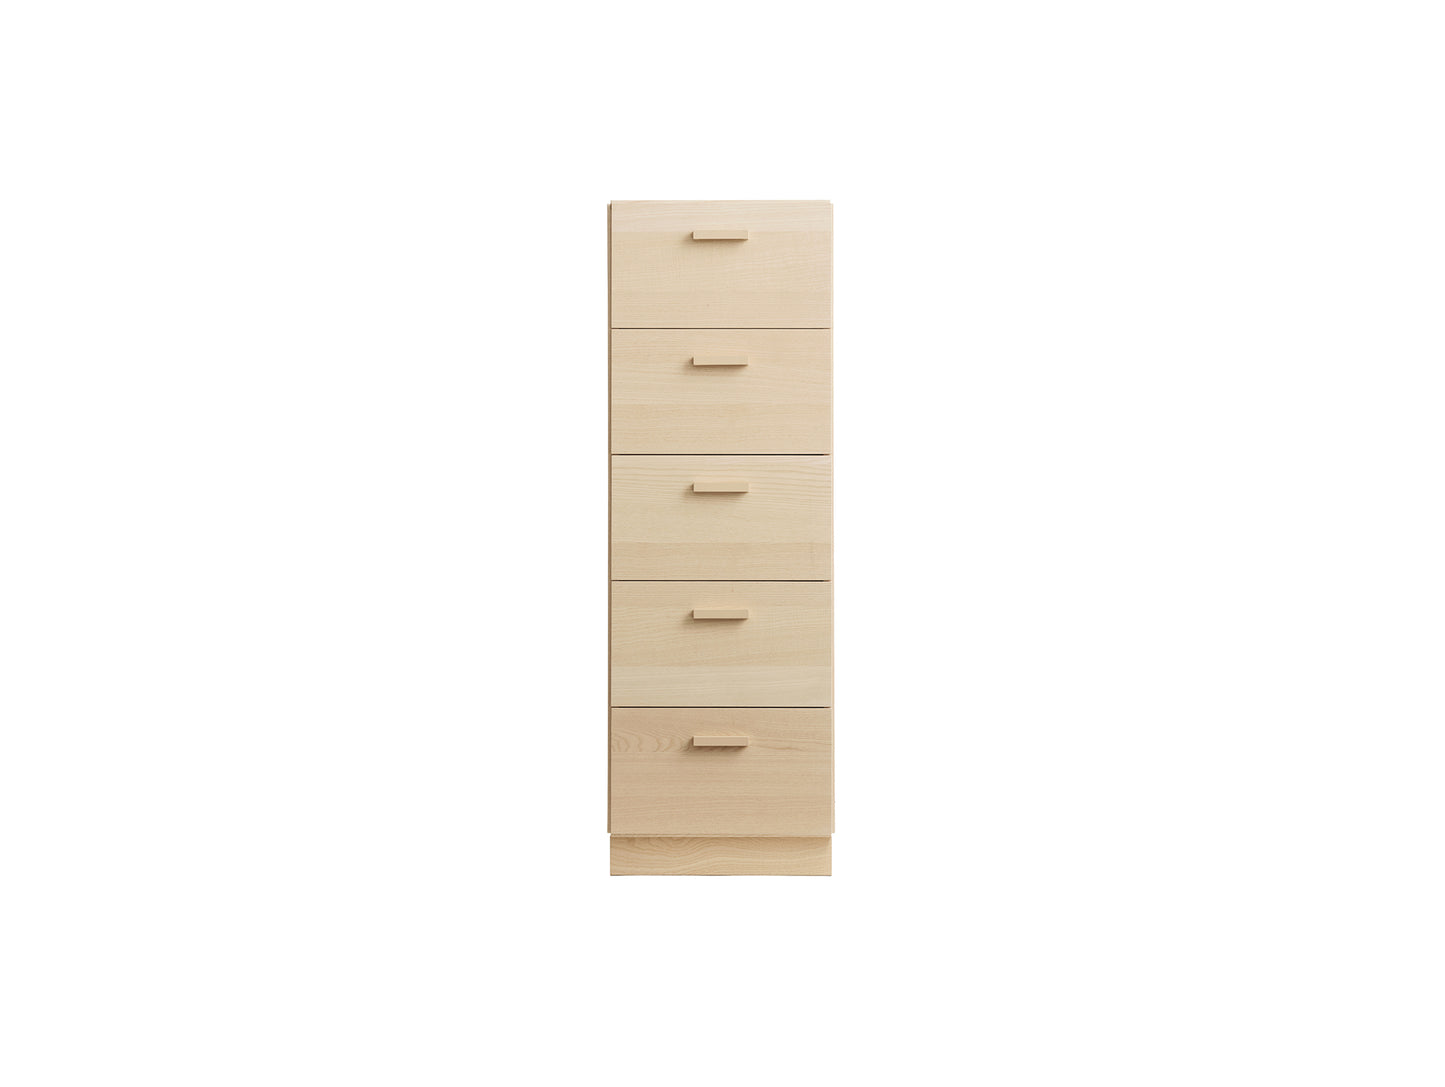 Relief Drawers with Plinth Base - Tall by String - Ash